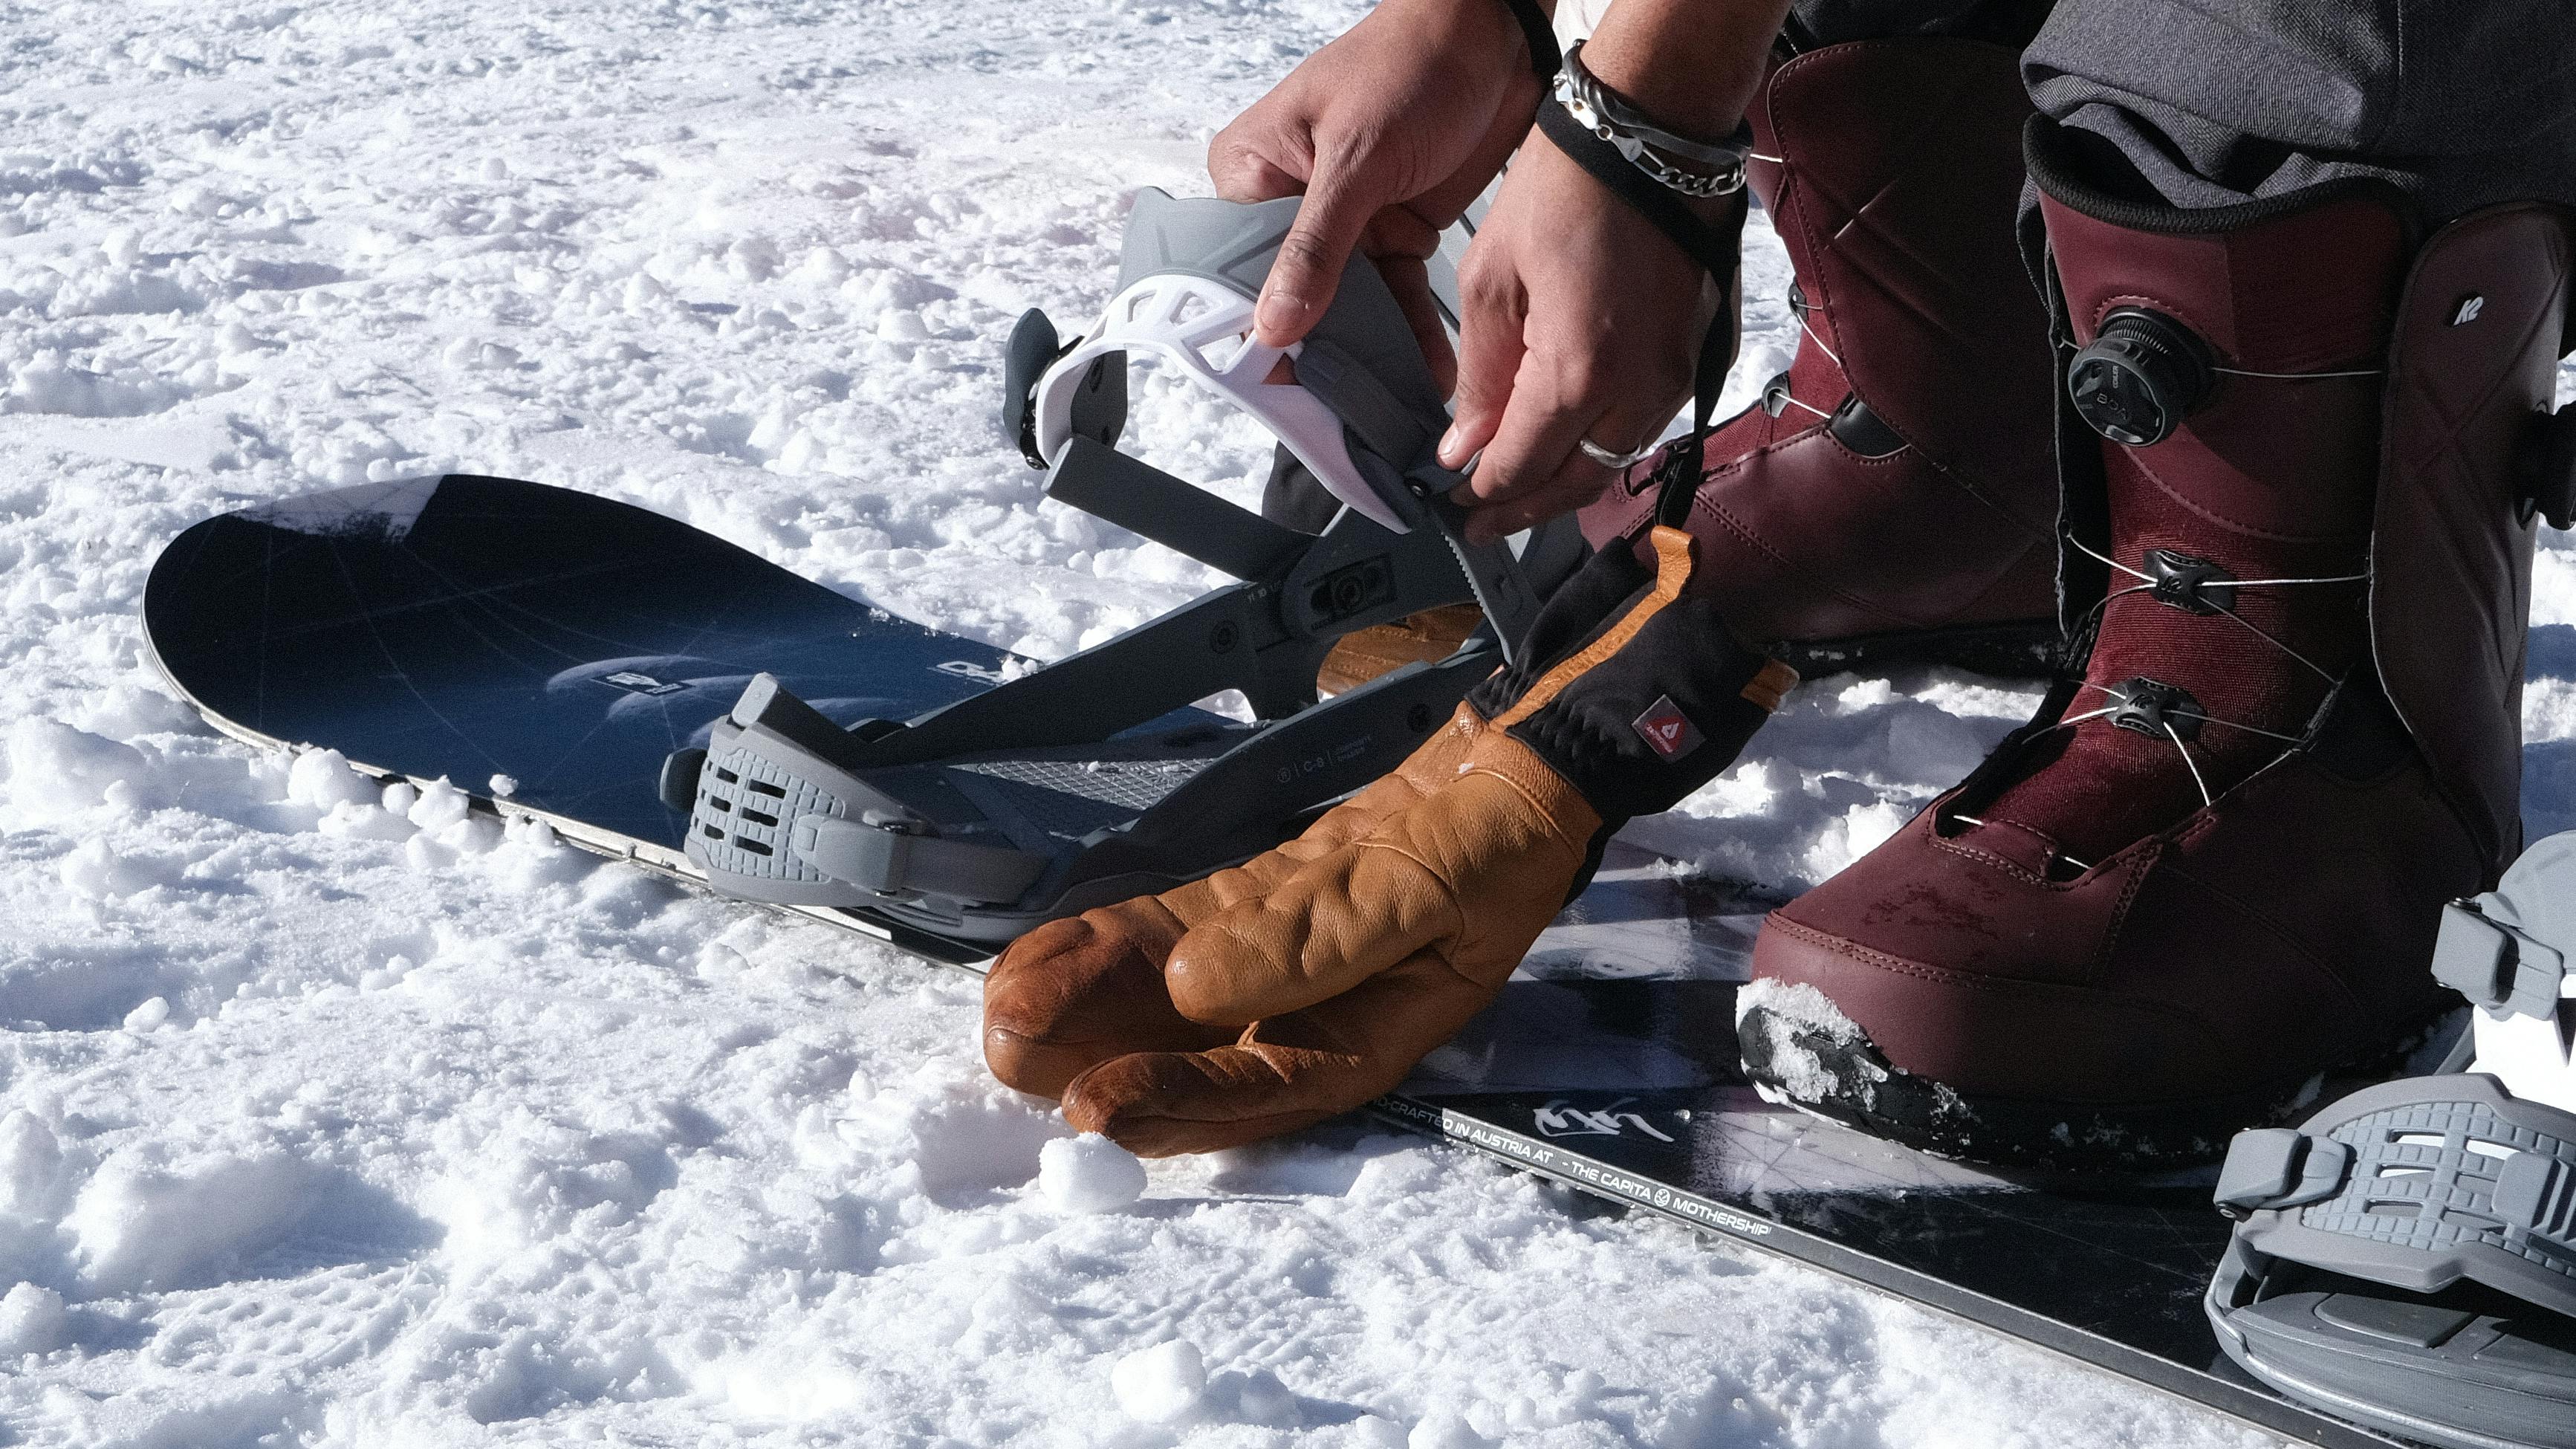 Strapping into a snowboard